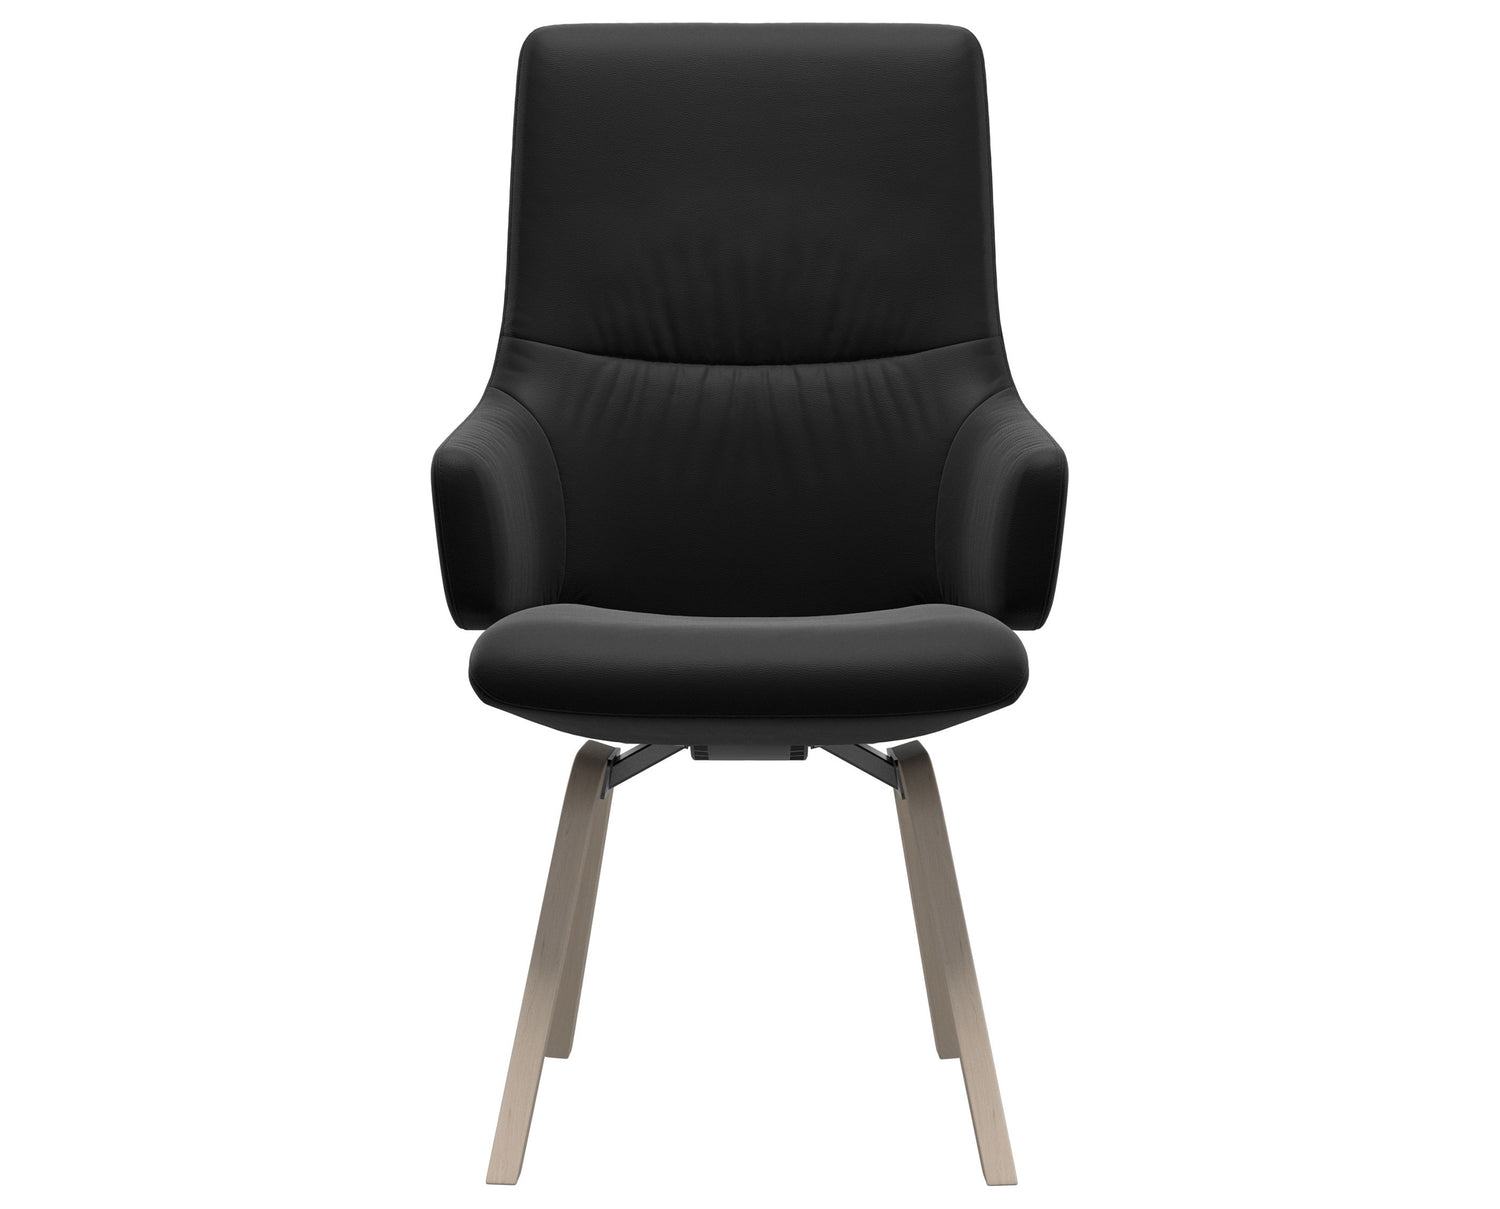 Paloma Leather Black & Whitewash Base | Stressless Mint High Back D200 Dining Chair w/Arms | Valley Ridge Furniture